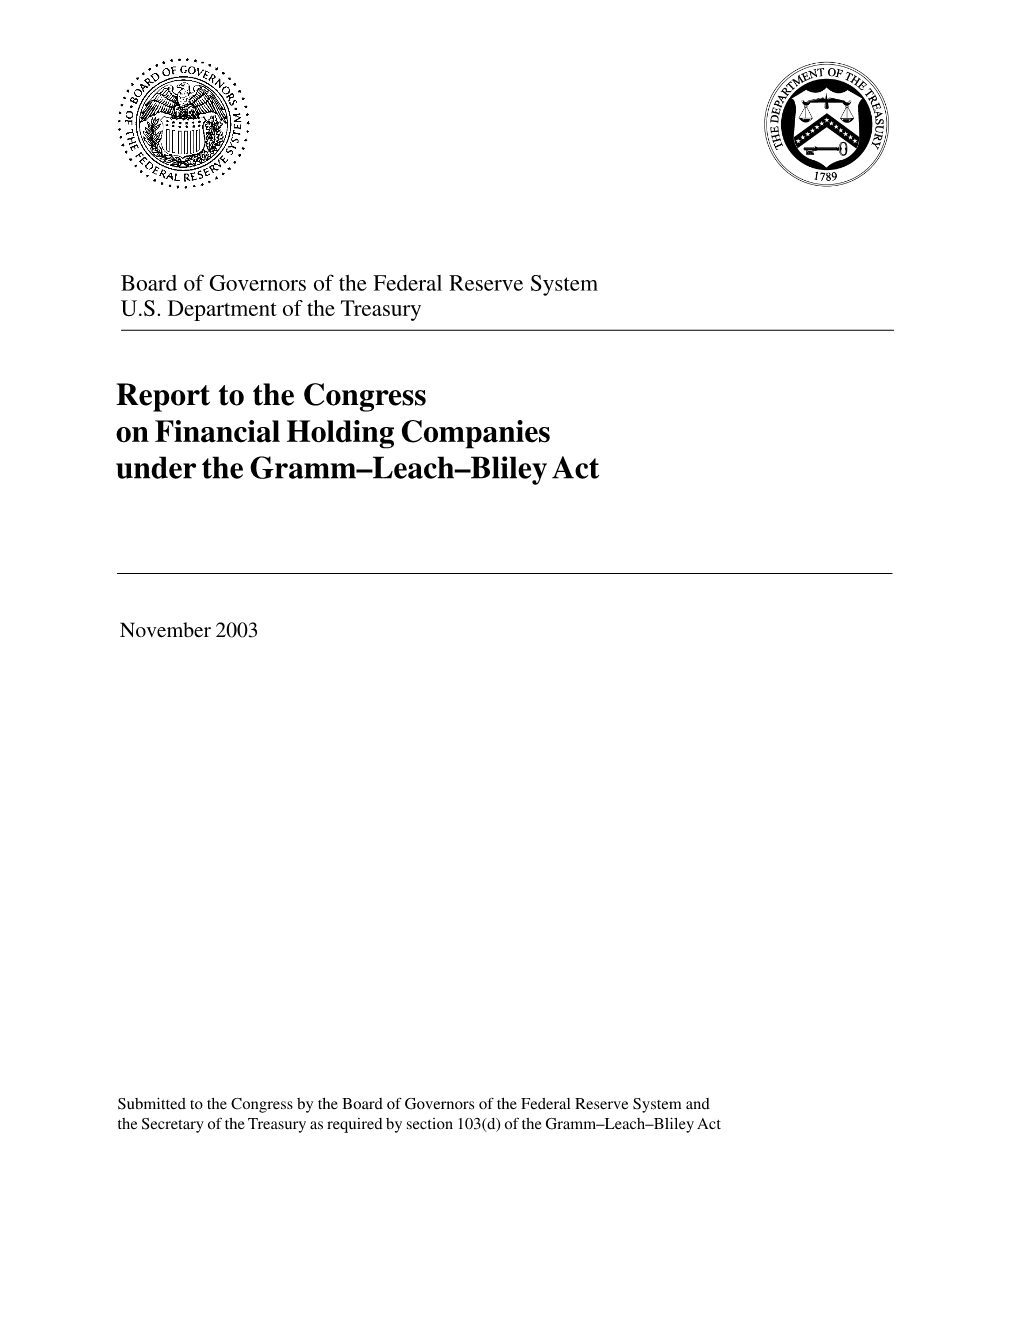 Report to the Congress on Financial Holding Companies Under the Gramm–Leach–Bliley Act